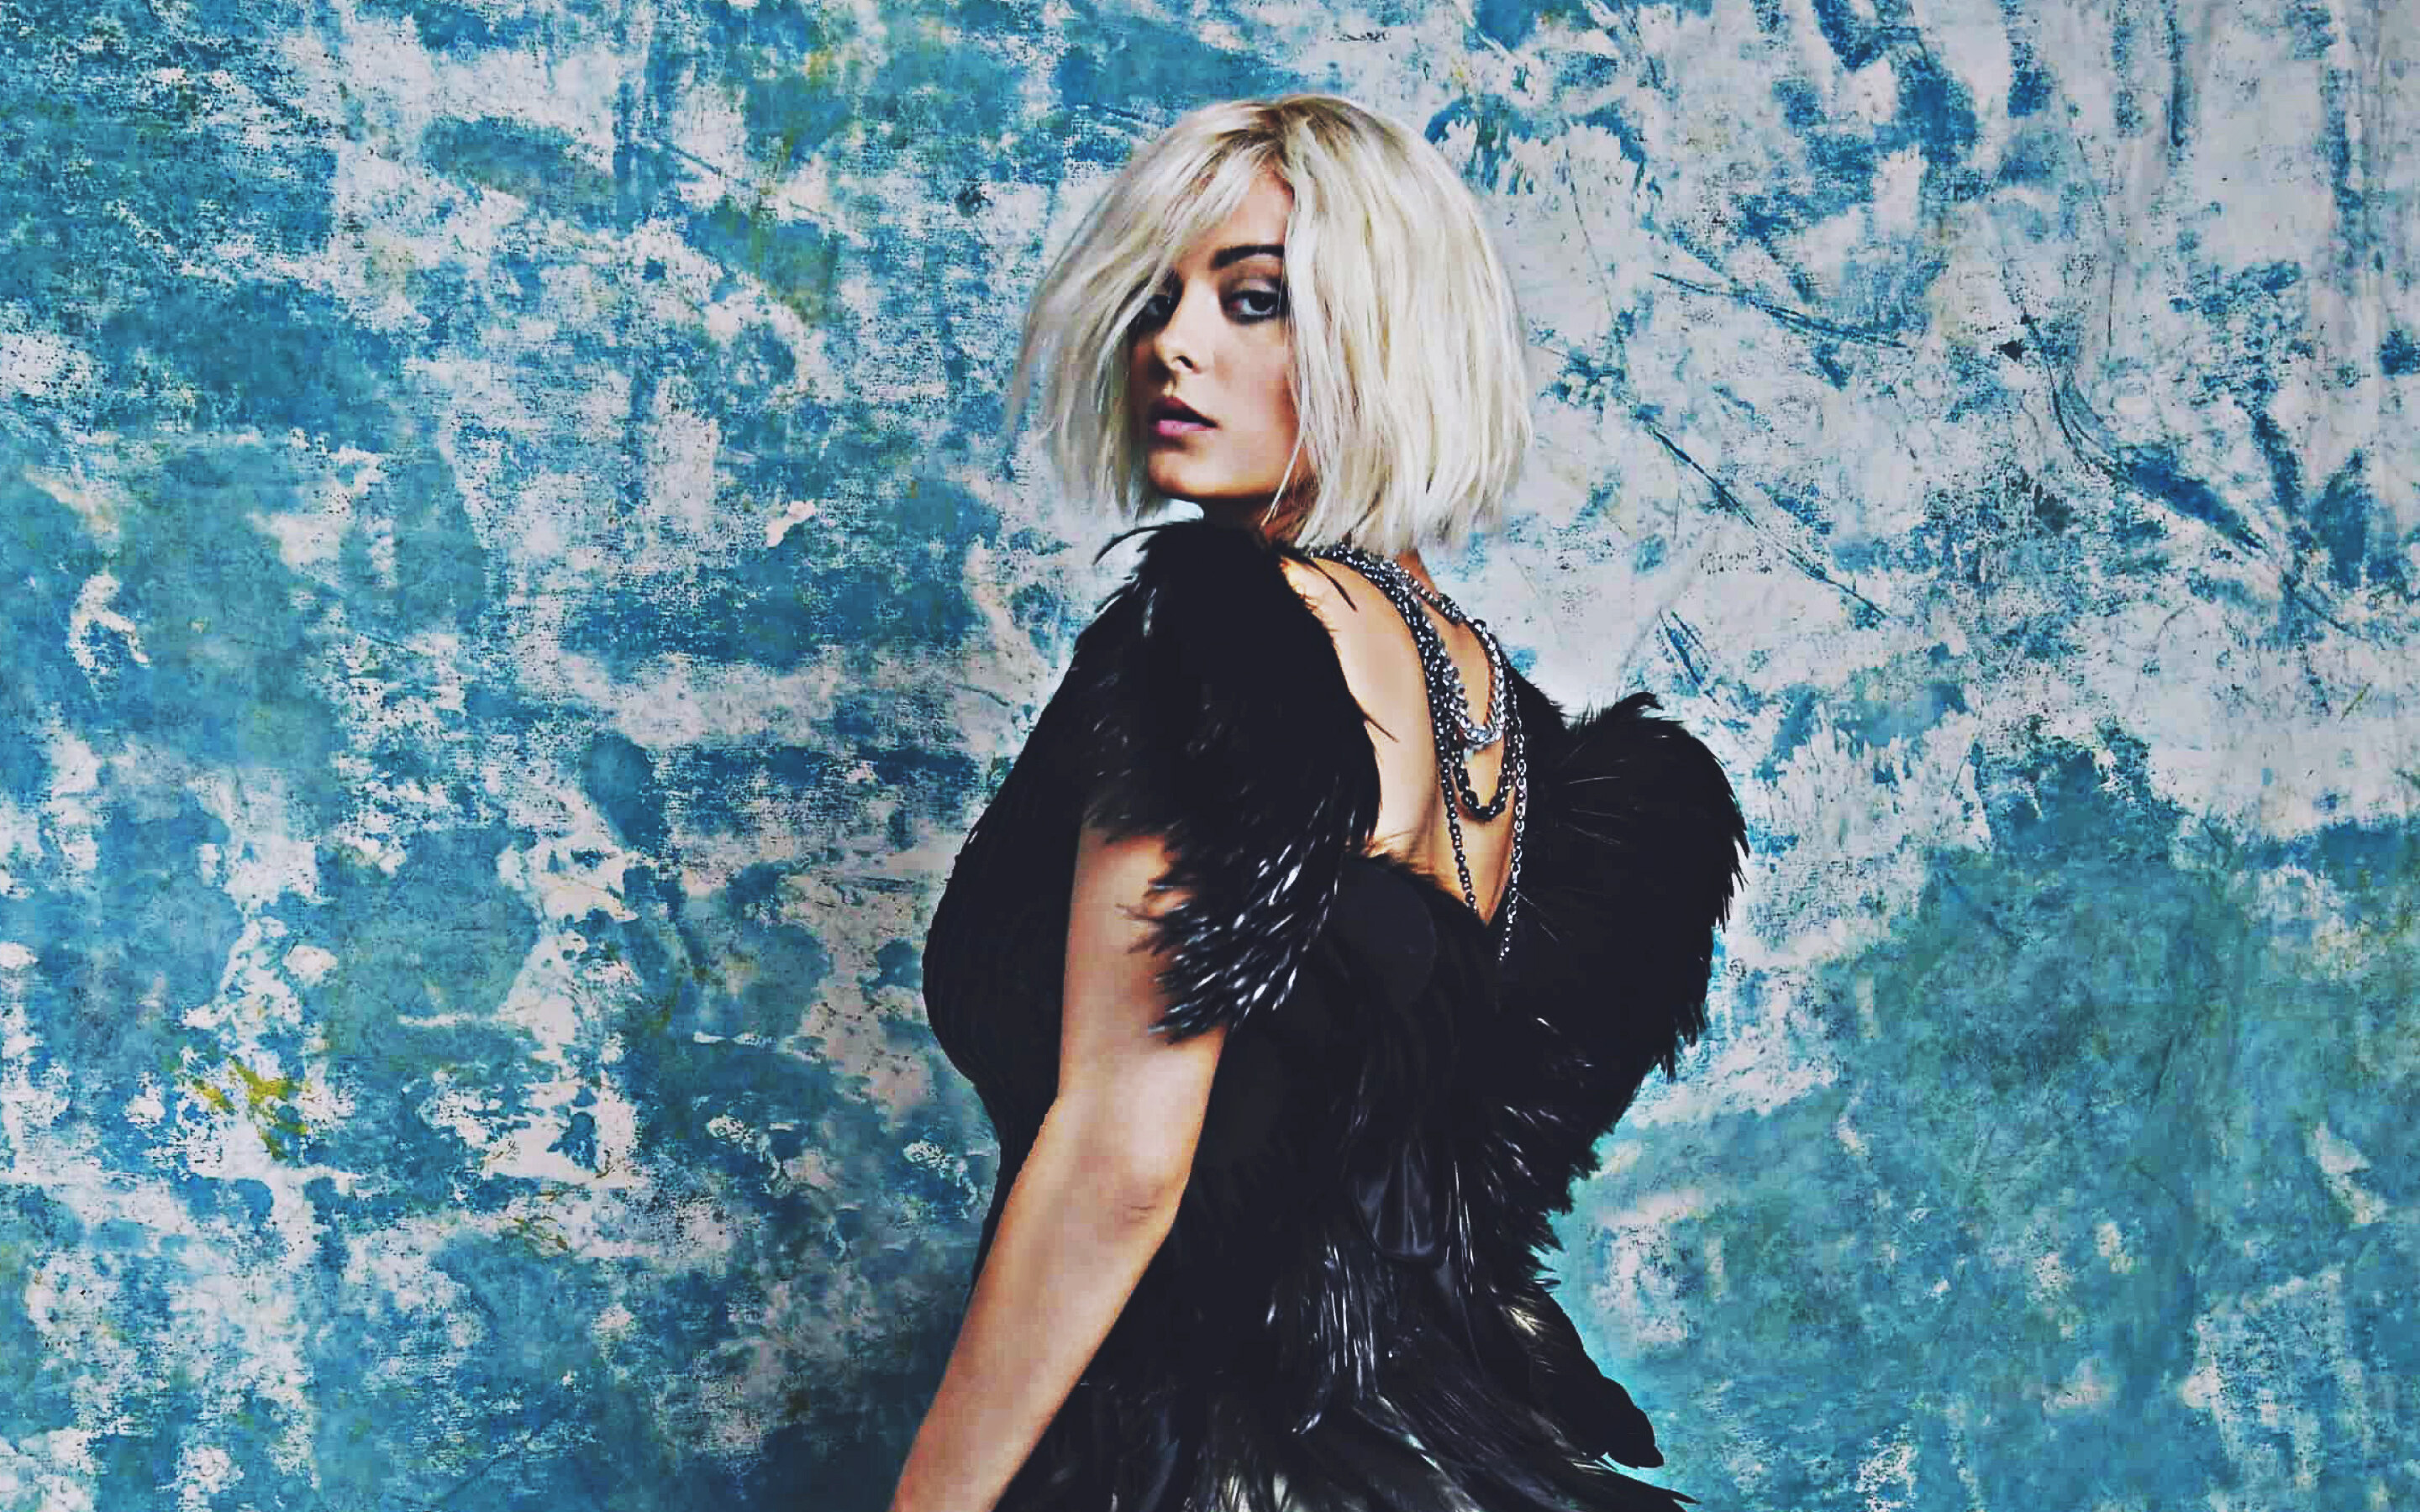 Bebe Rexha: American singer, collaborated on "Me, Myself & I" with G-Eazy. 2880x1800 HD Wallpaper.